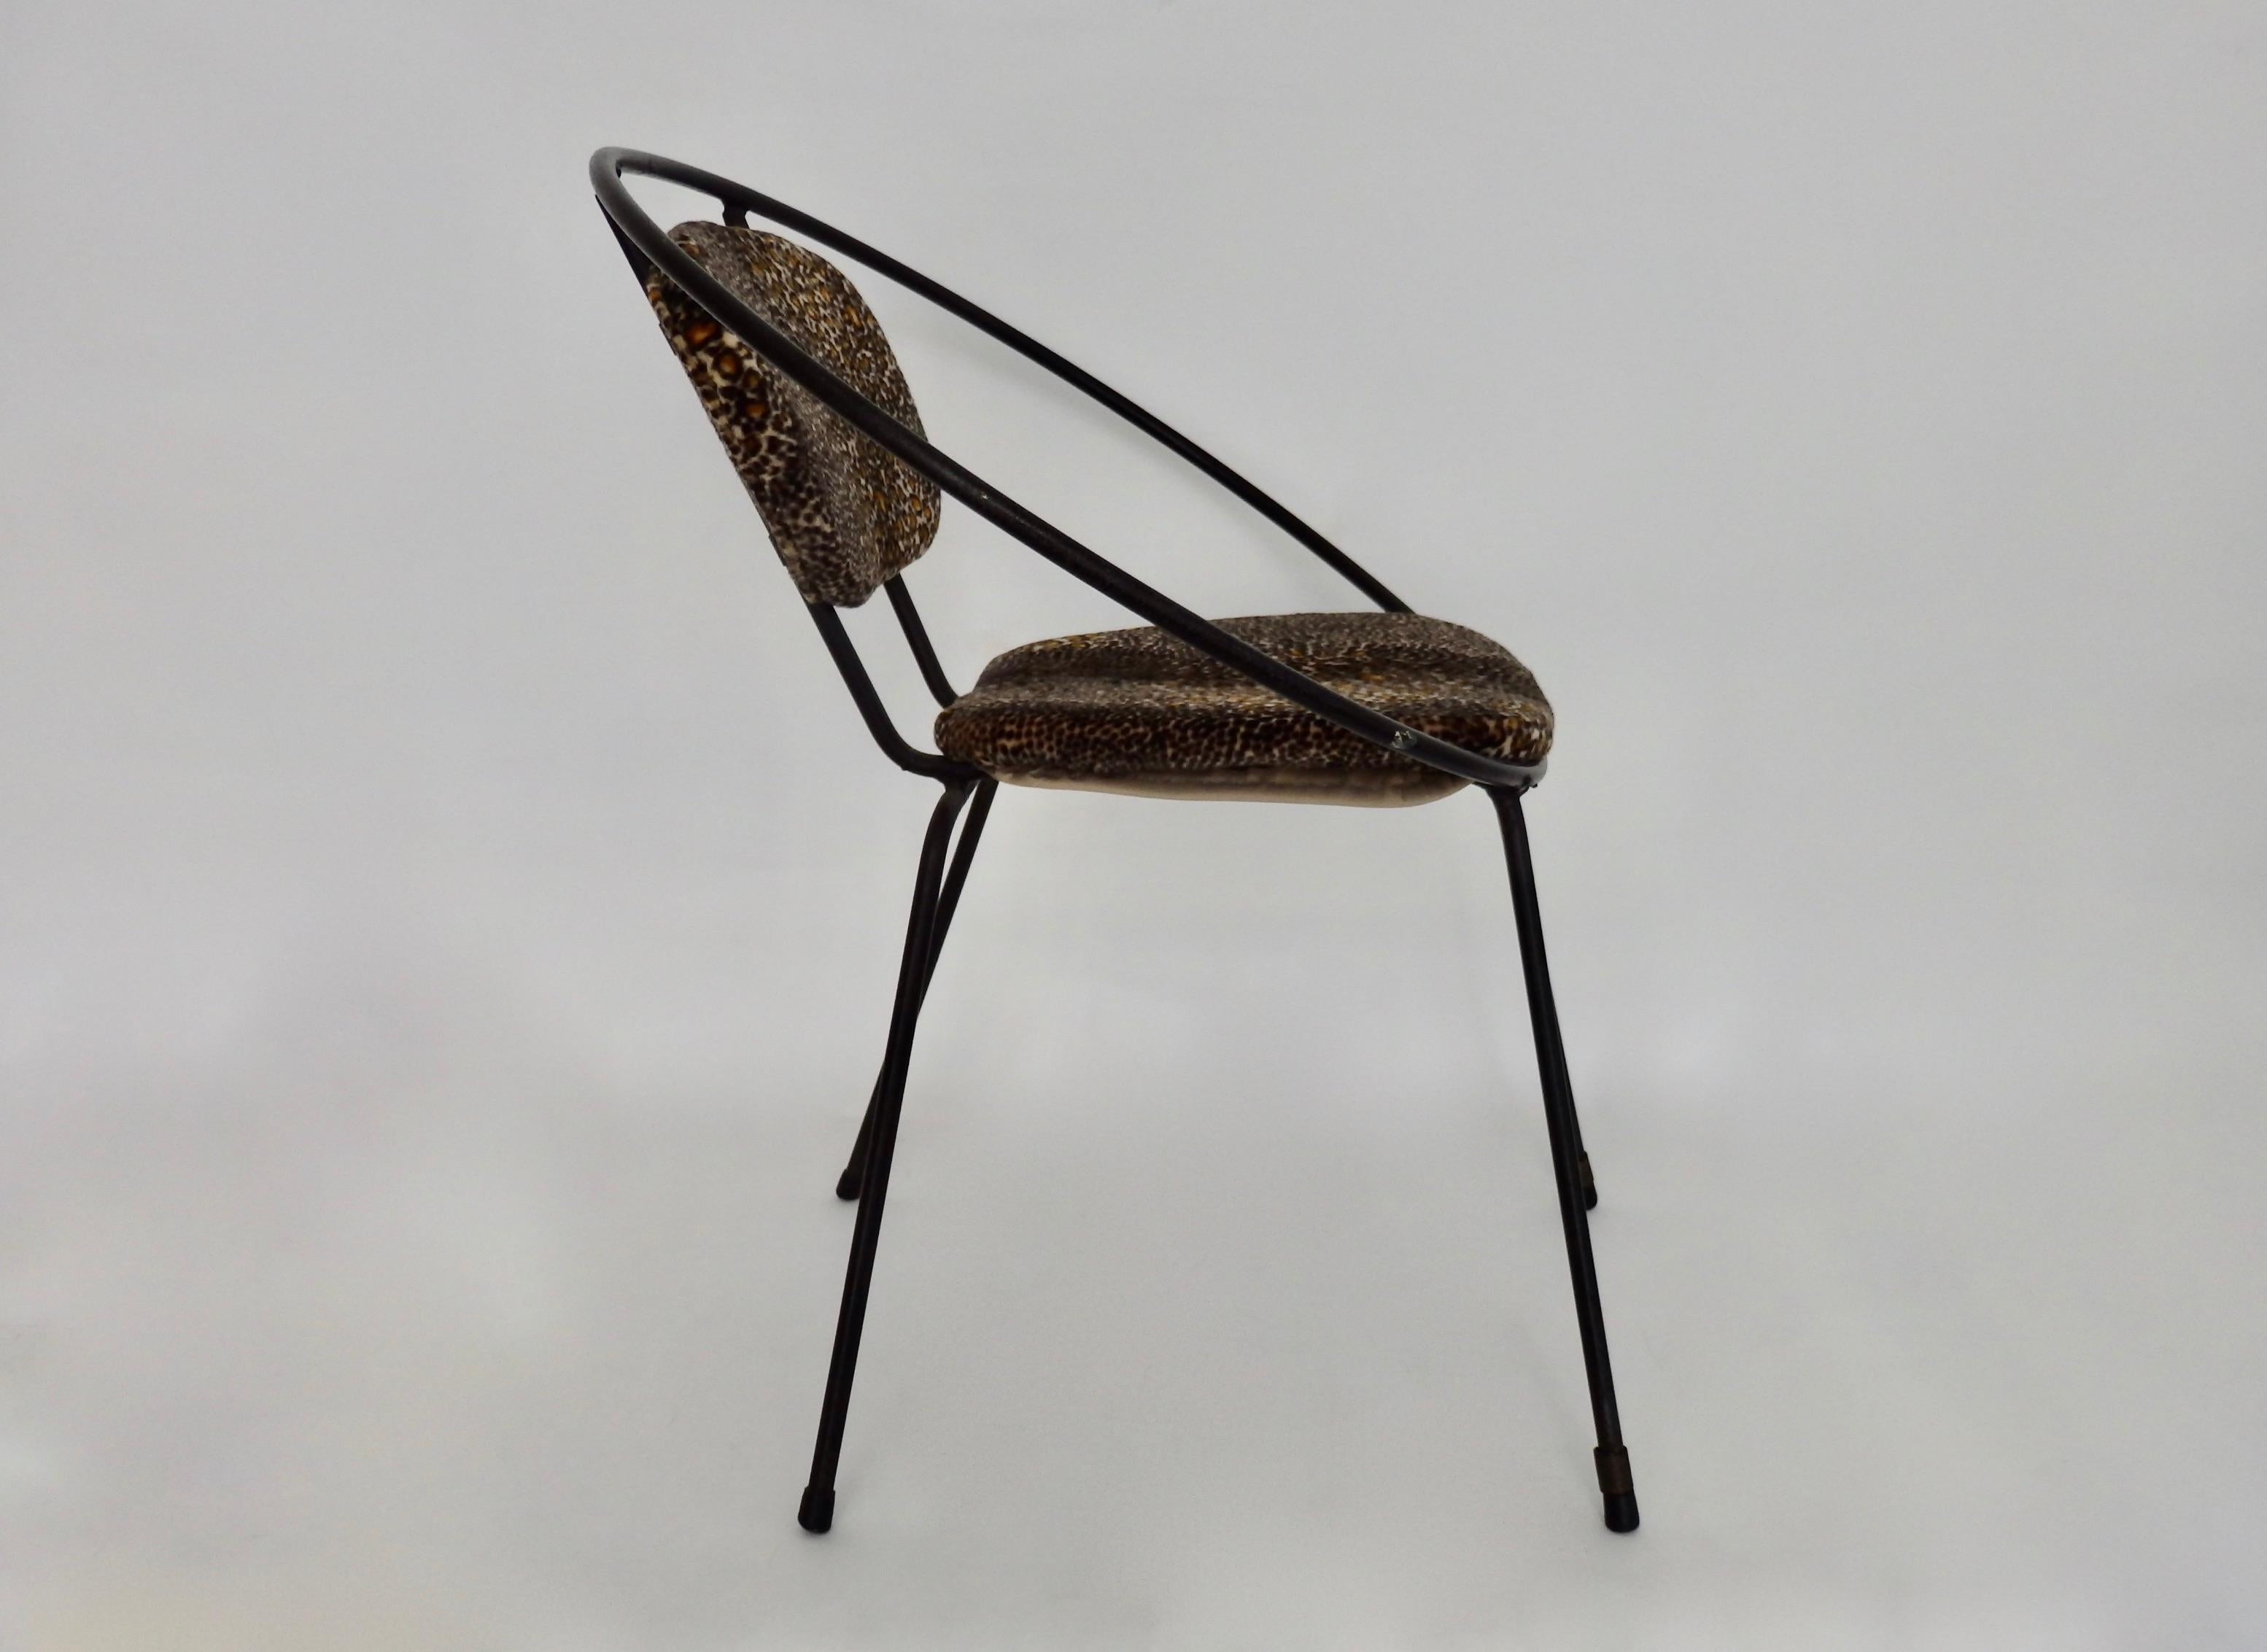 American Children's Wrought Iron Hoop Chair, Attributed to Tony Paul